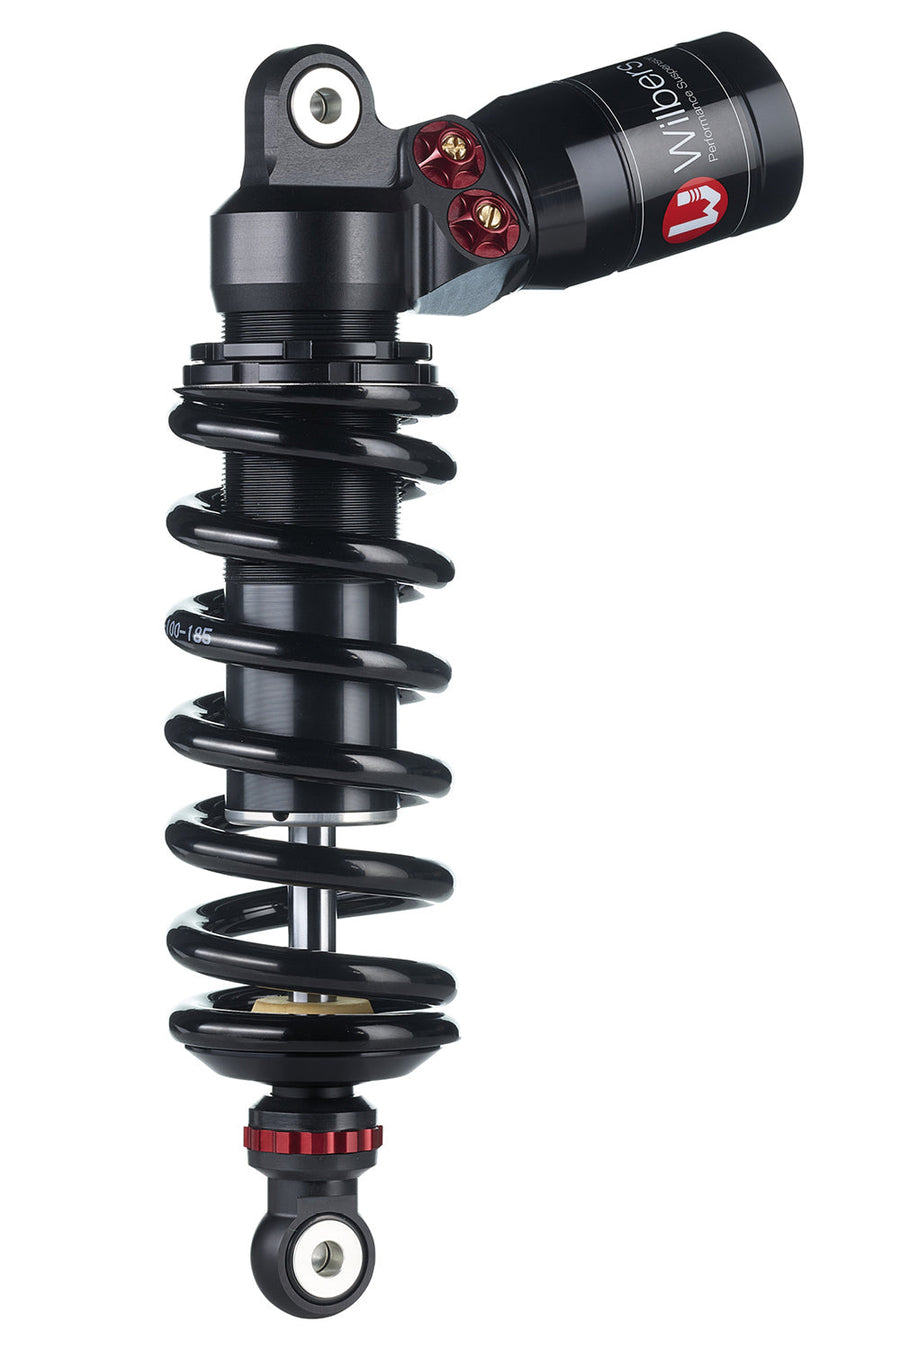 Shock Absorber Type 643 Competition P